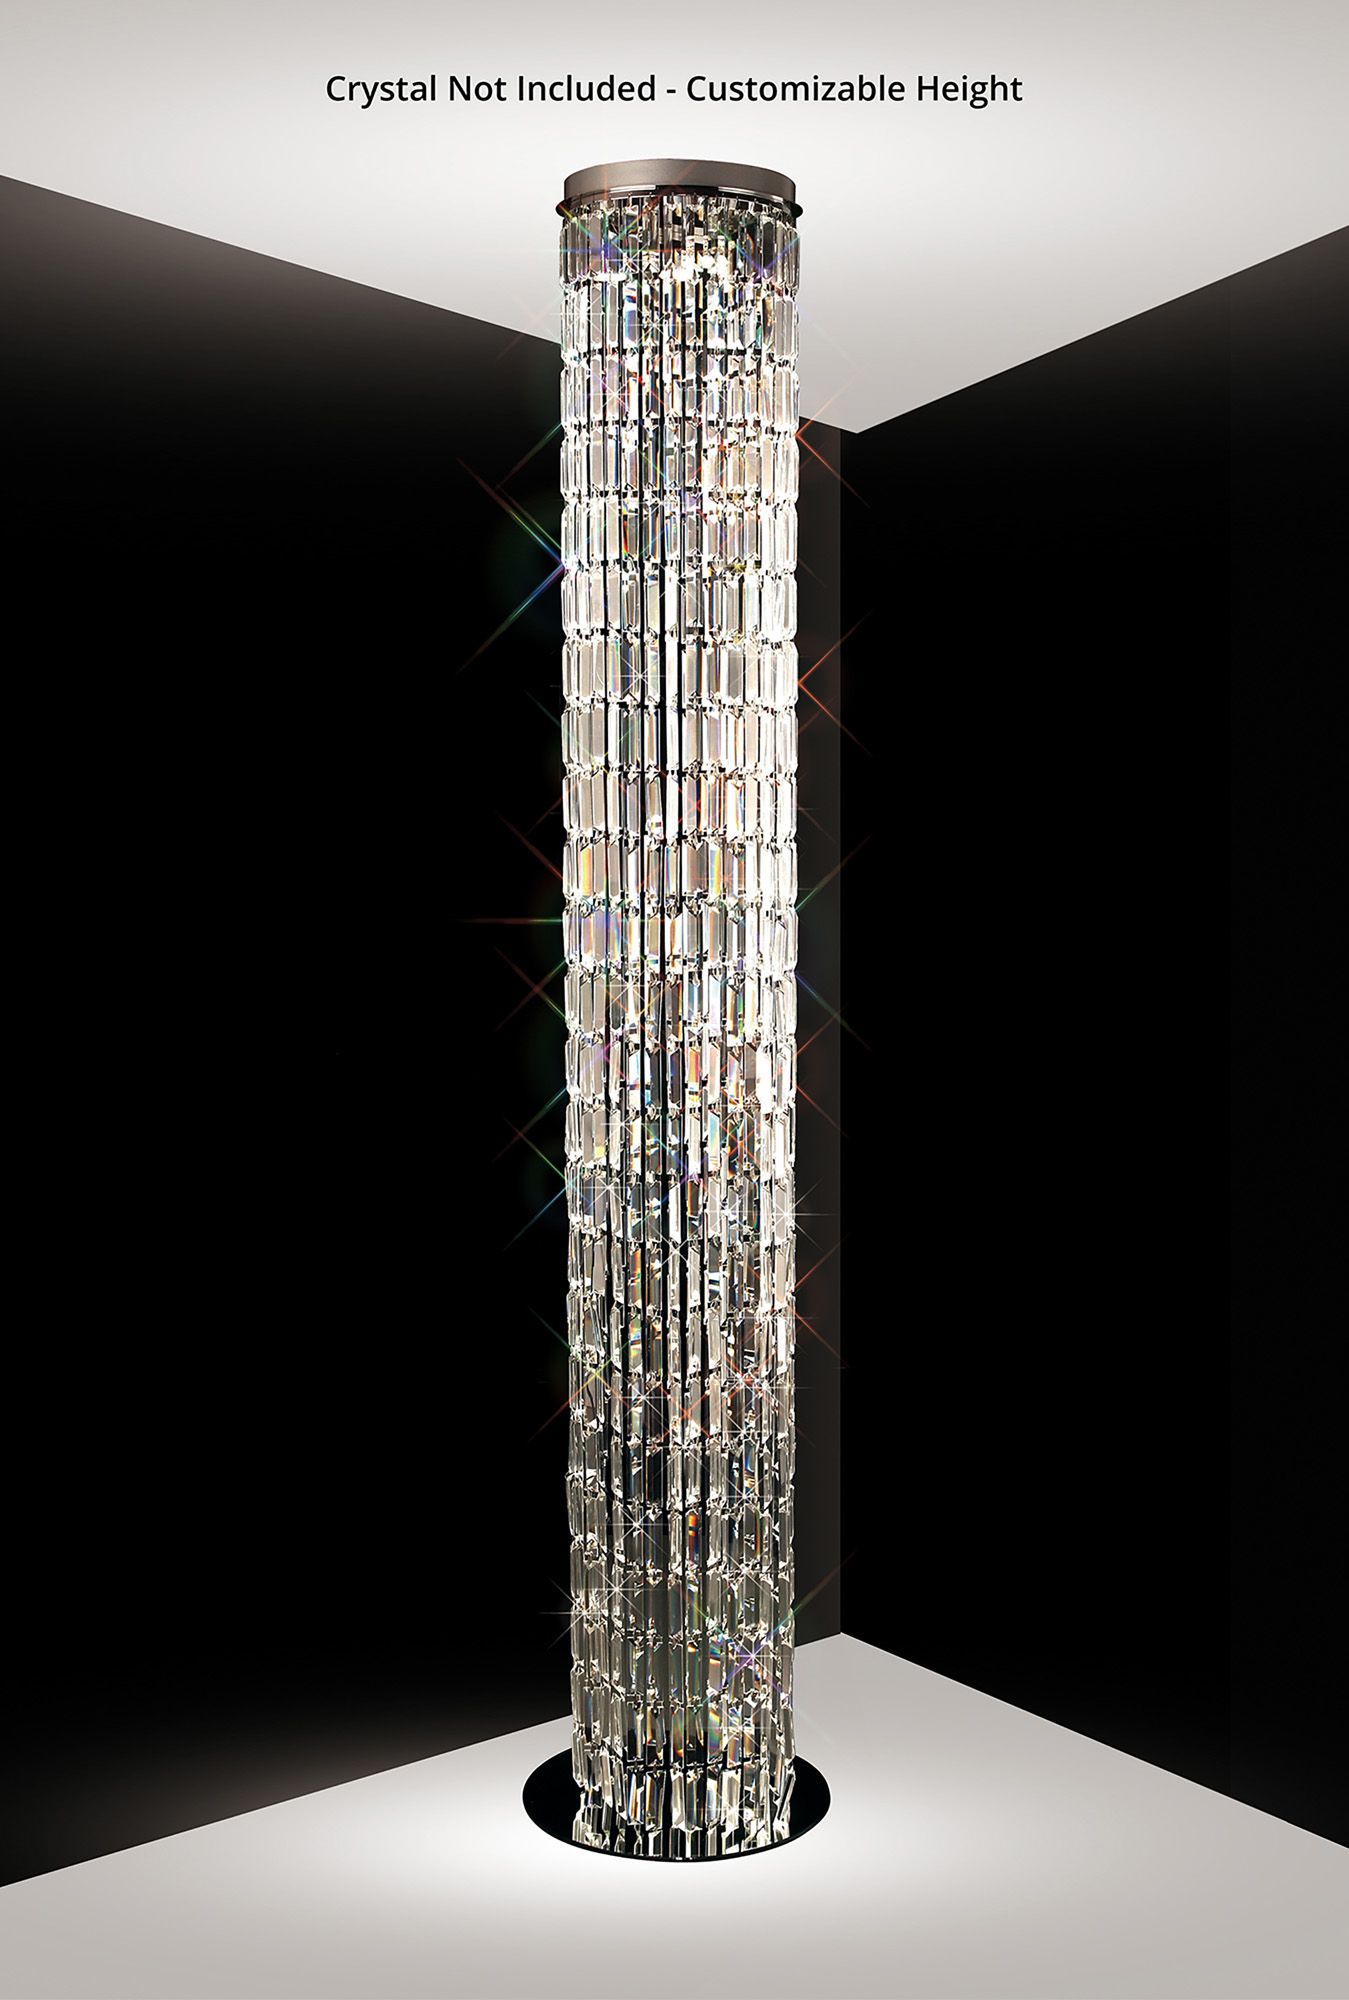 Crystal Floor Lamps Modern Crystal Floor Lamps Led Components – The  Inspired Lighting Llc, Dubai Uae Intended For Chrome Crystal Tower Floor Lamps (View 3 of 15)